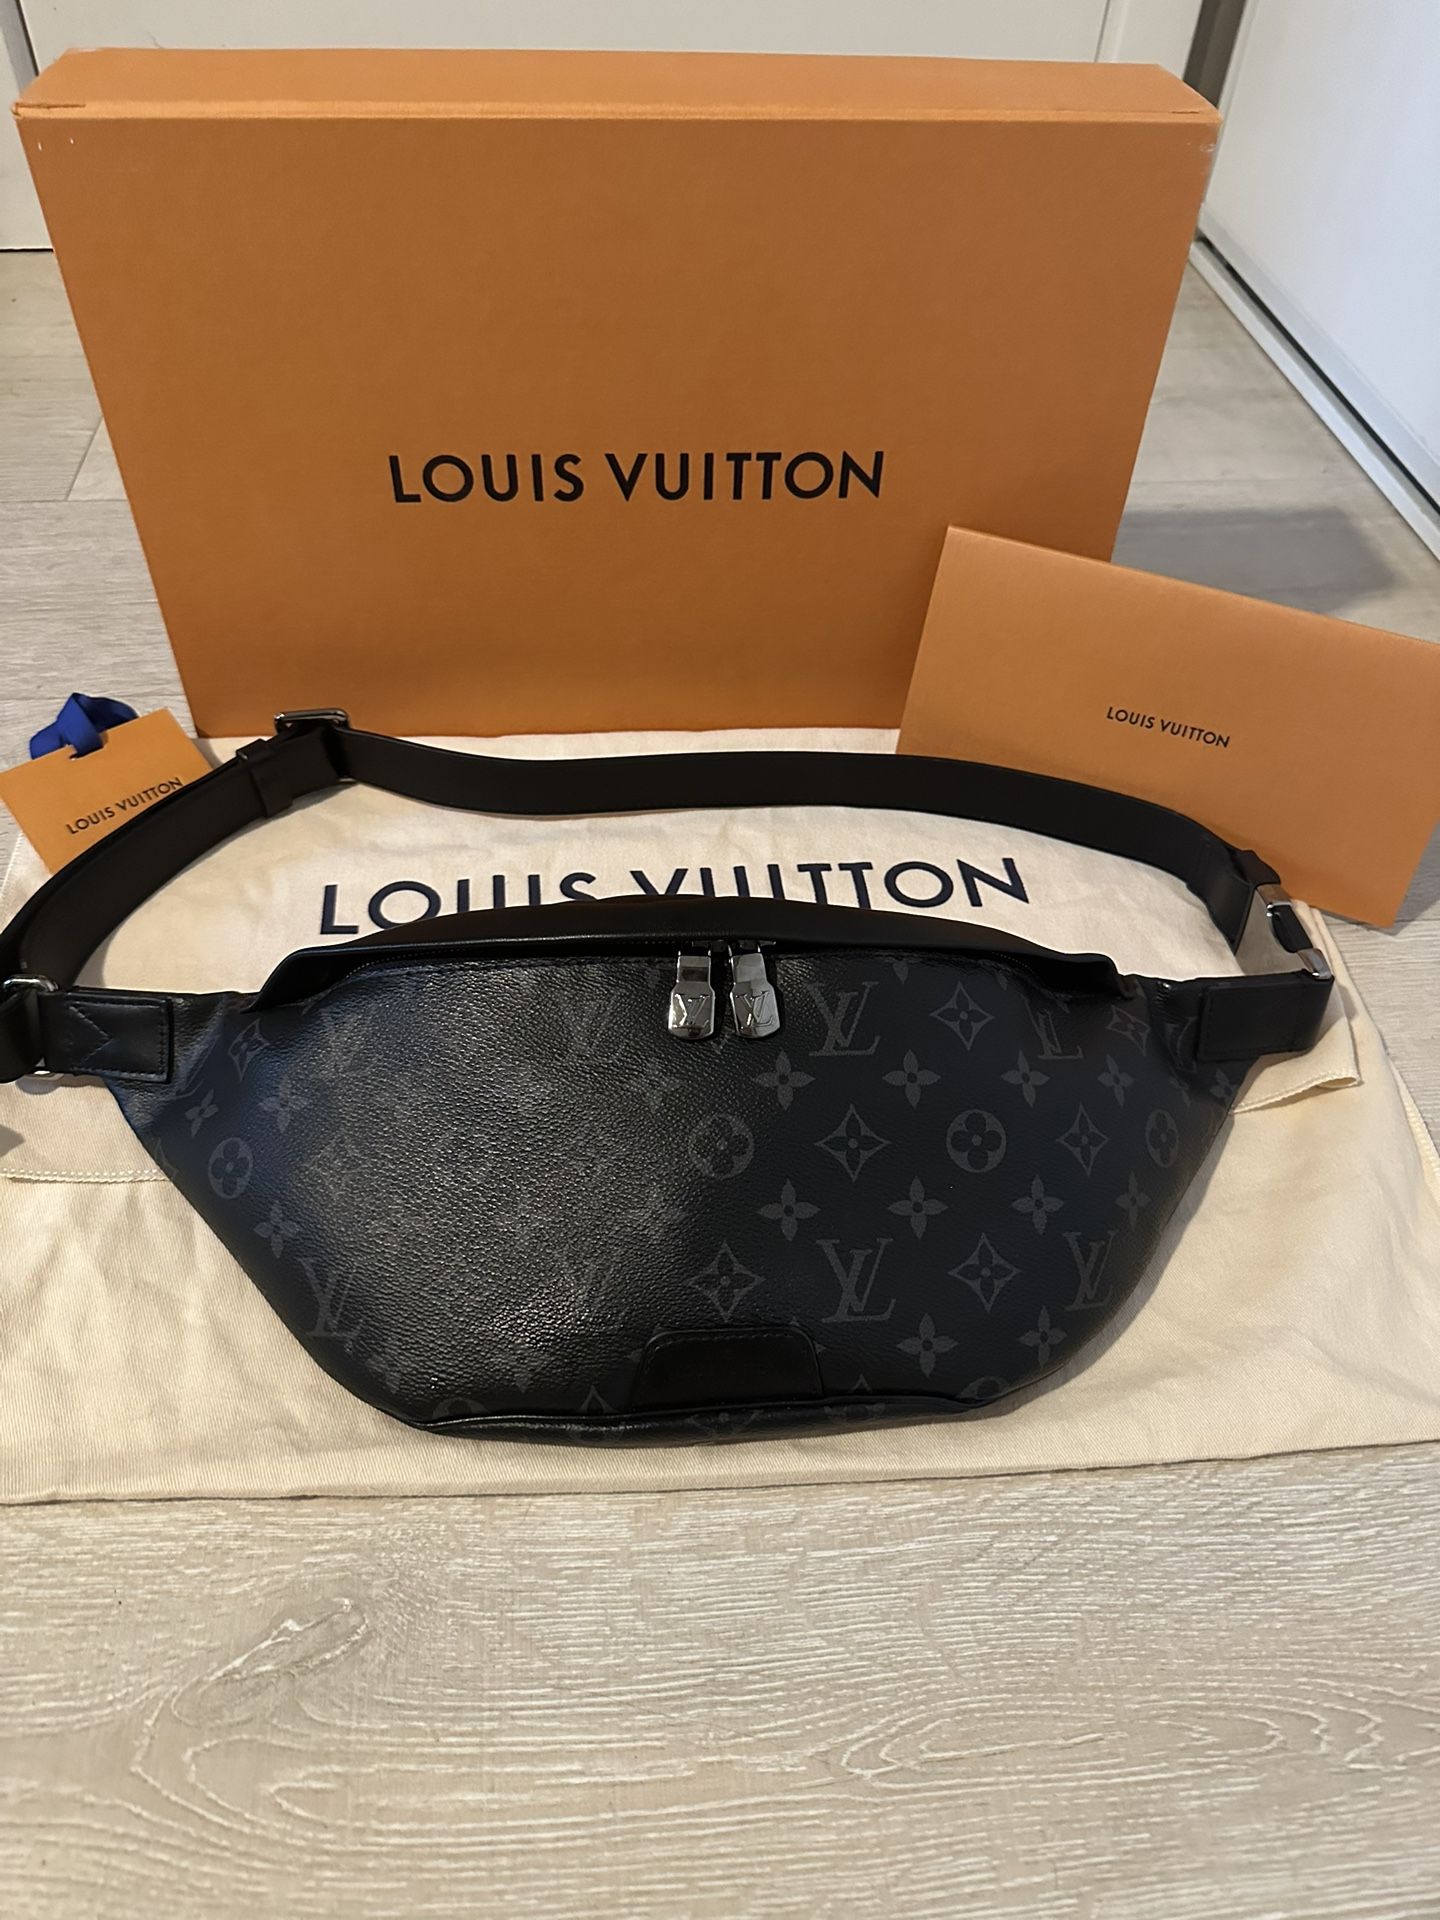 Louis Vuitton Discovery Bumbag PM for Sale in San Diego, CA